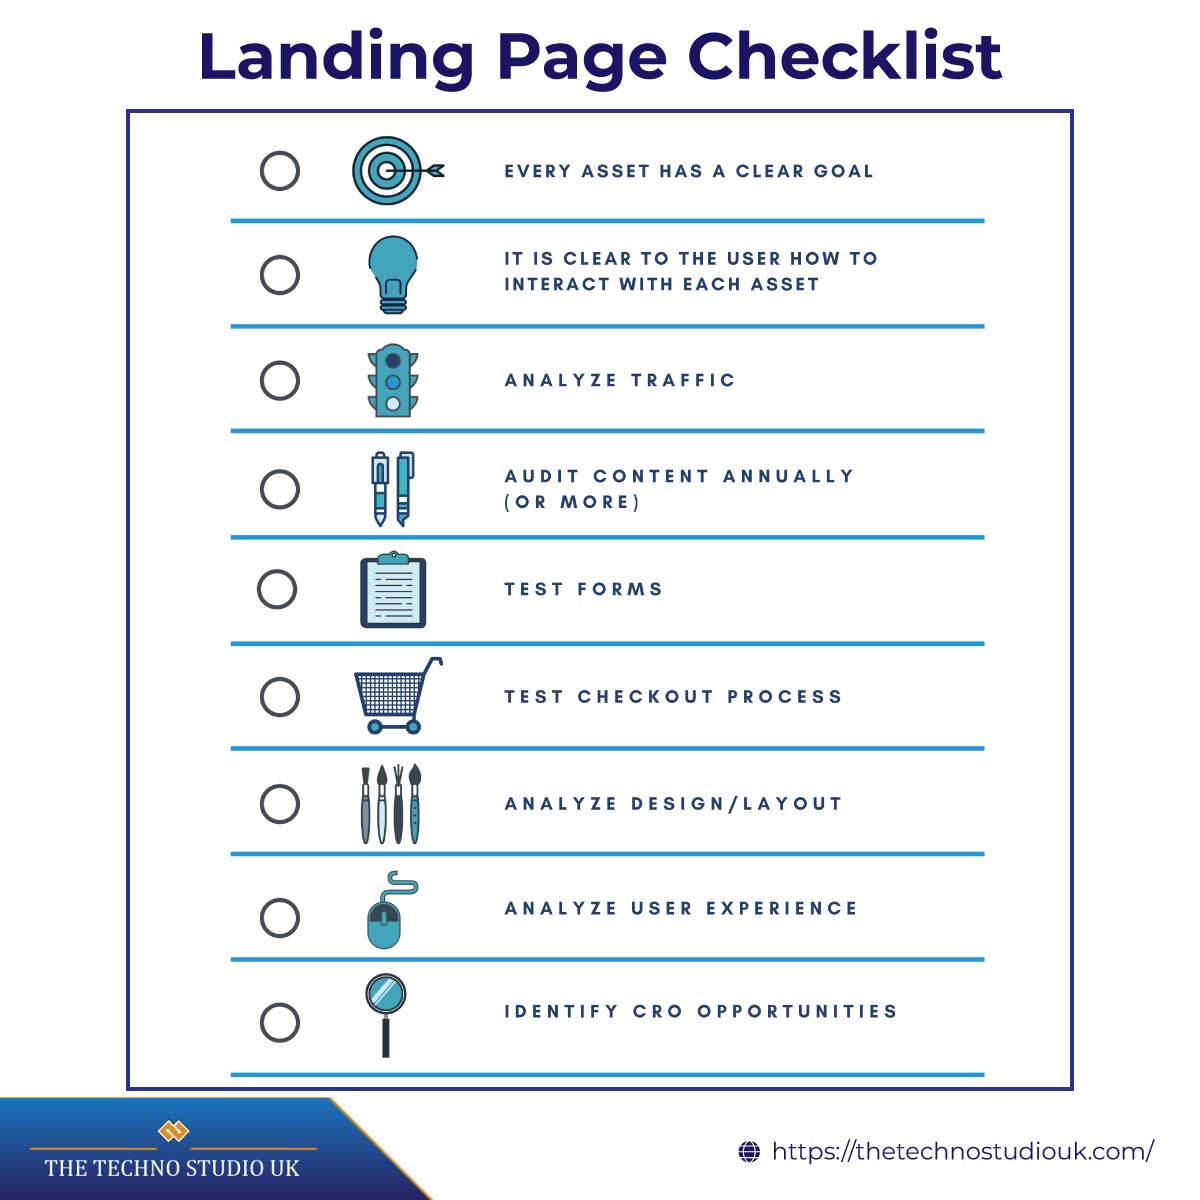 9 Effective Points To Landing Page Optimize Checklist 2022